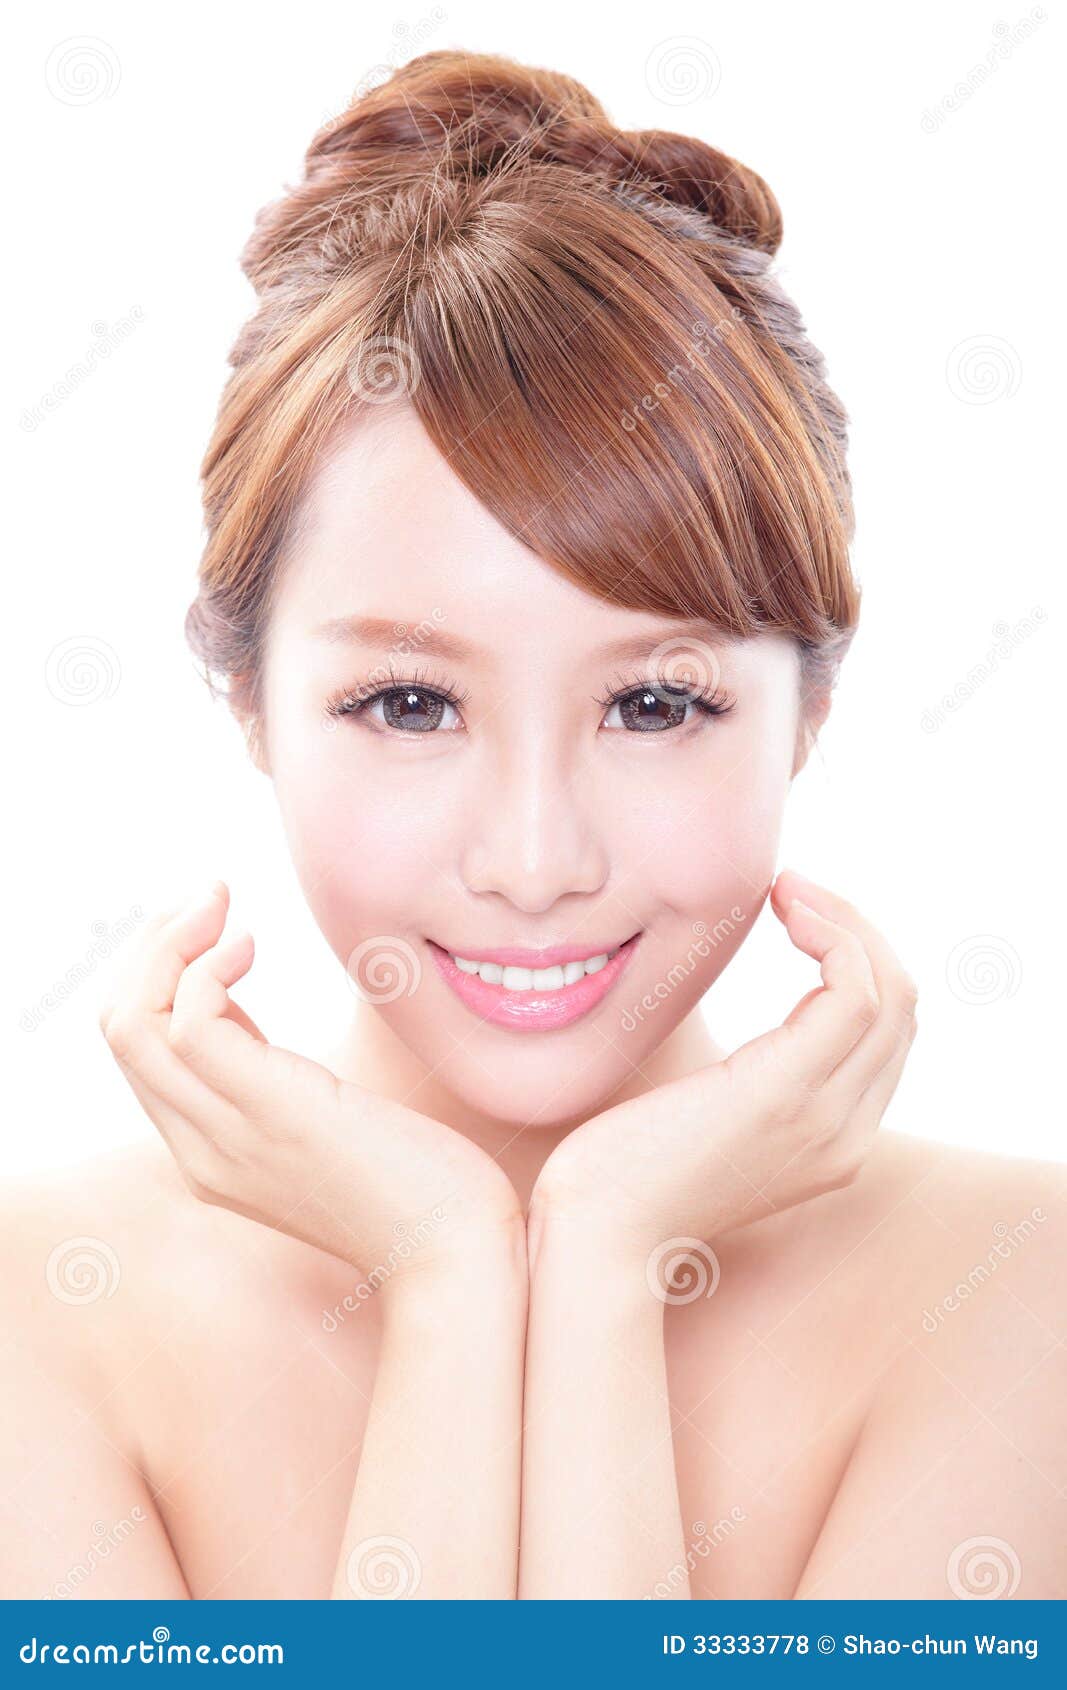 Smile Face of woman with health teeth. Smile happy Face of beautiful woman with health teeth and skin care isolated over white background. Beautiful young asian woman model